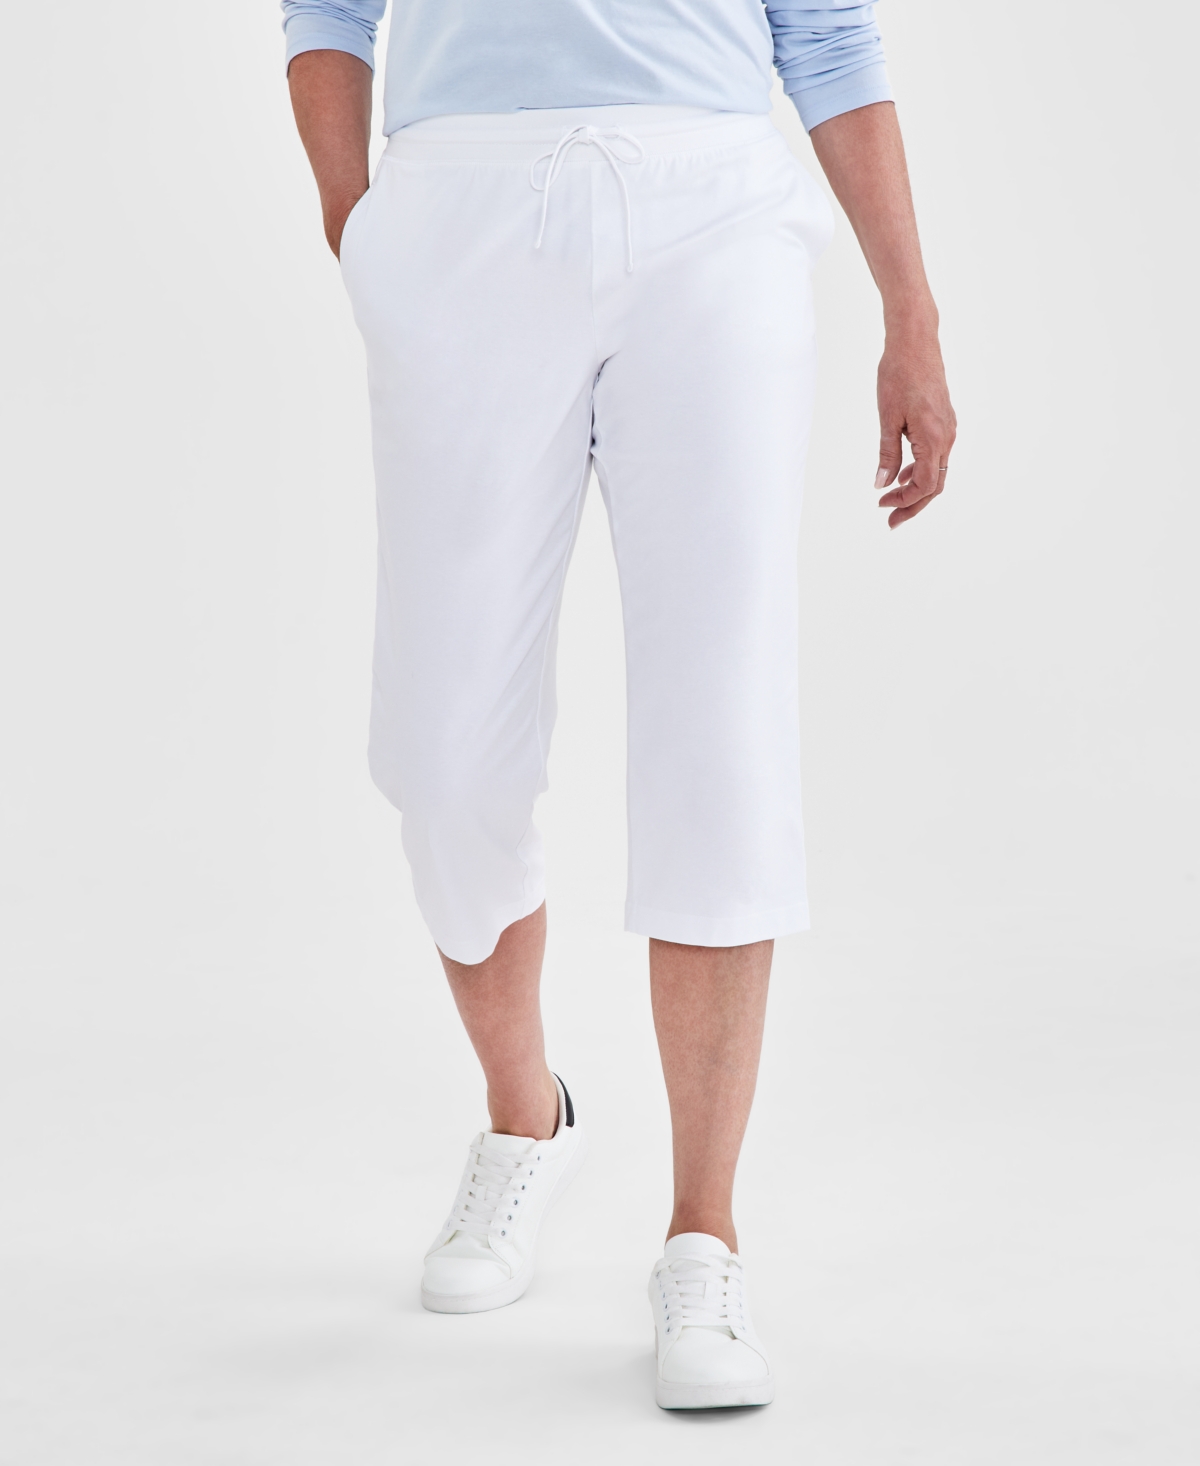 Style & Co Women's Mid Rise Capri Sweatpants, Created For Macy's In Bright White